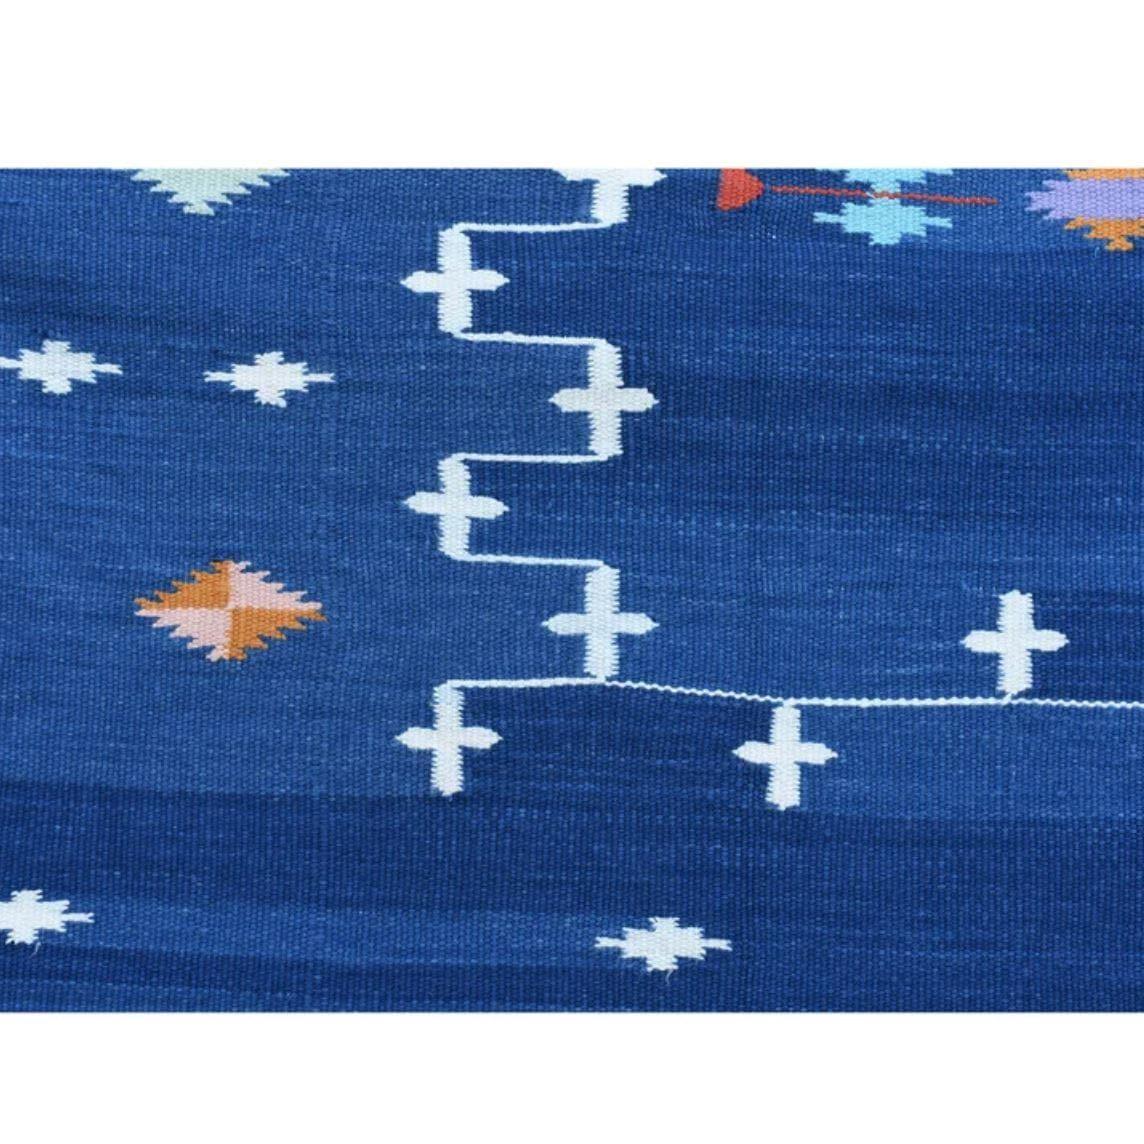 Narita Natural Vegetable Dyed Indian Dhurrie Reversible Cotton Rug - Blue - MAIA HOMES